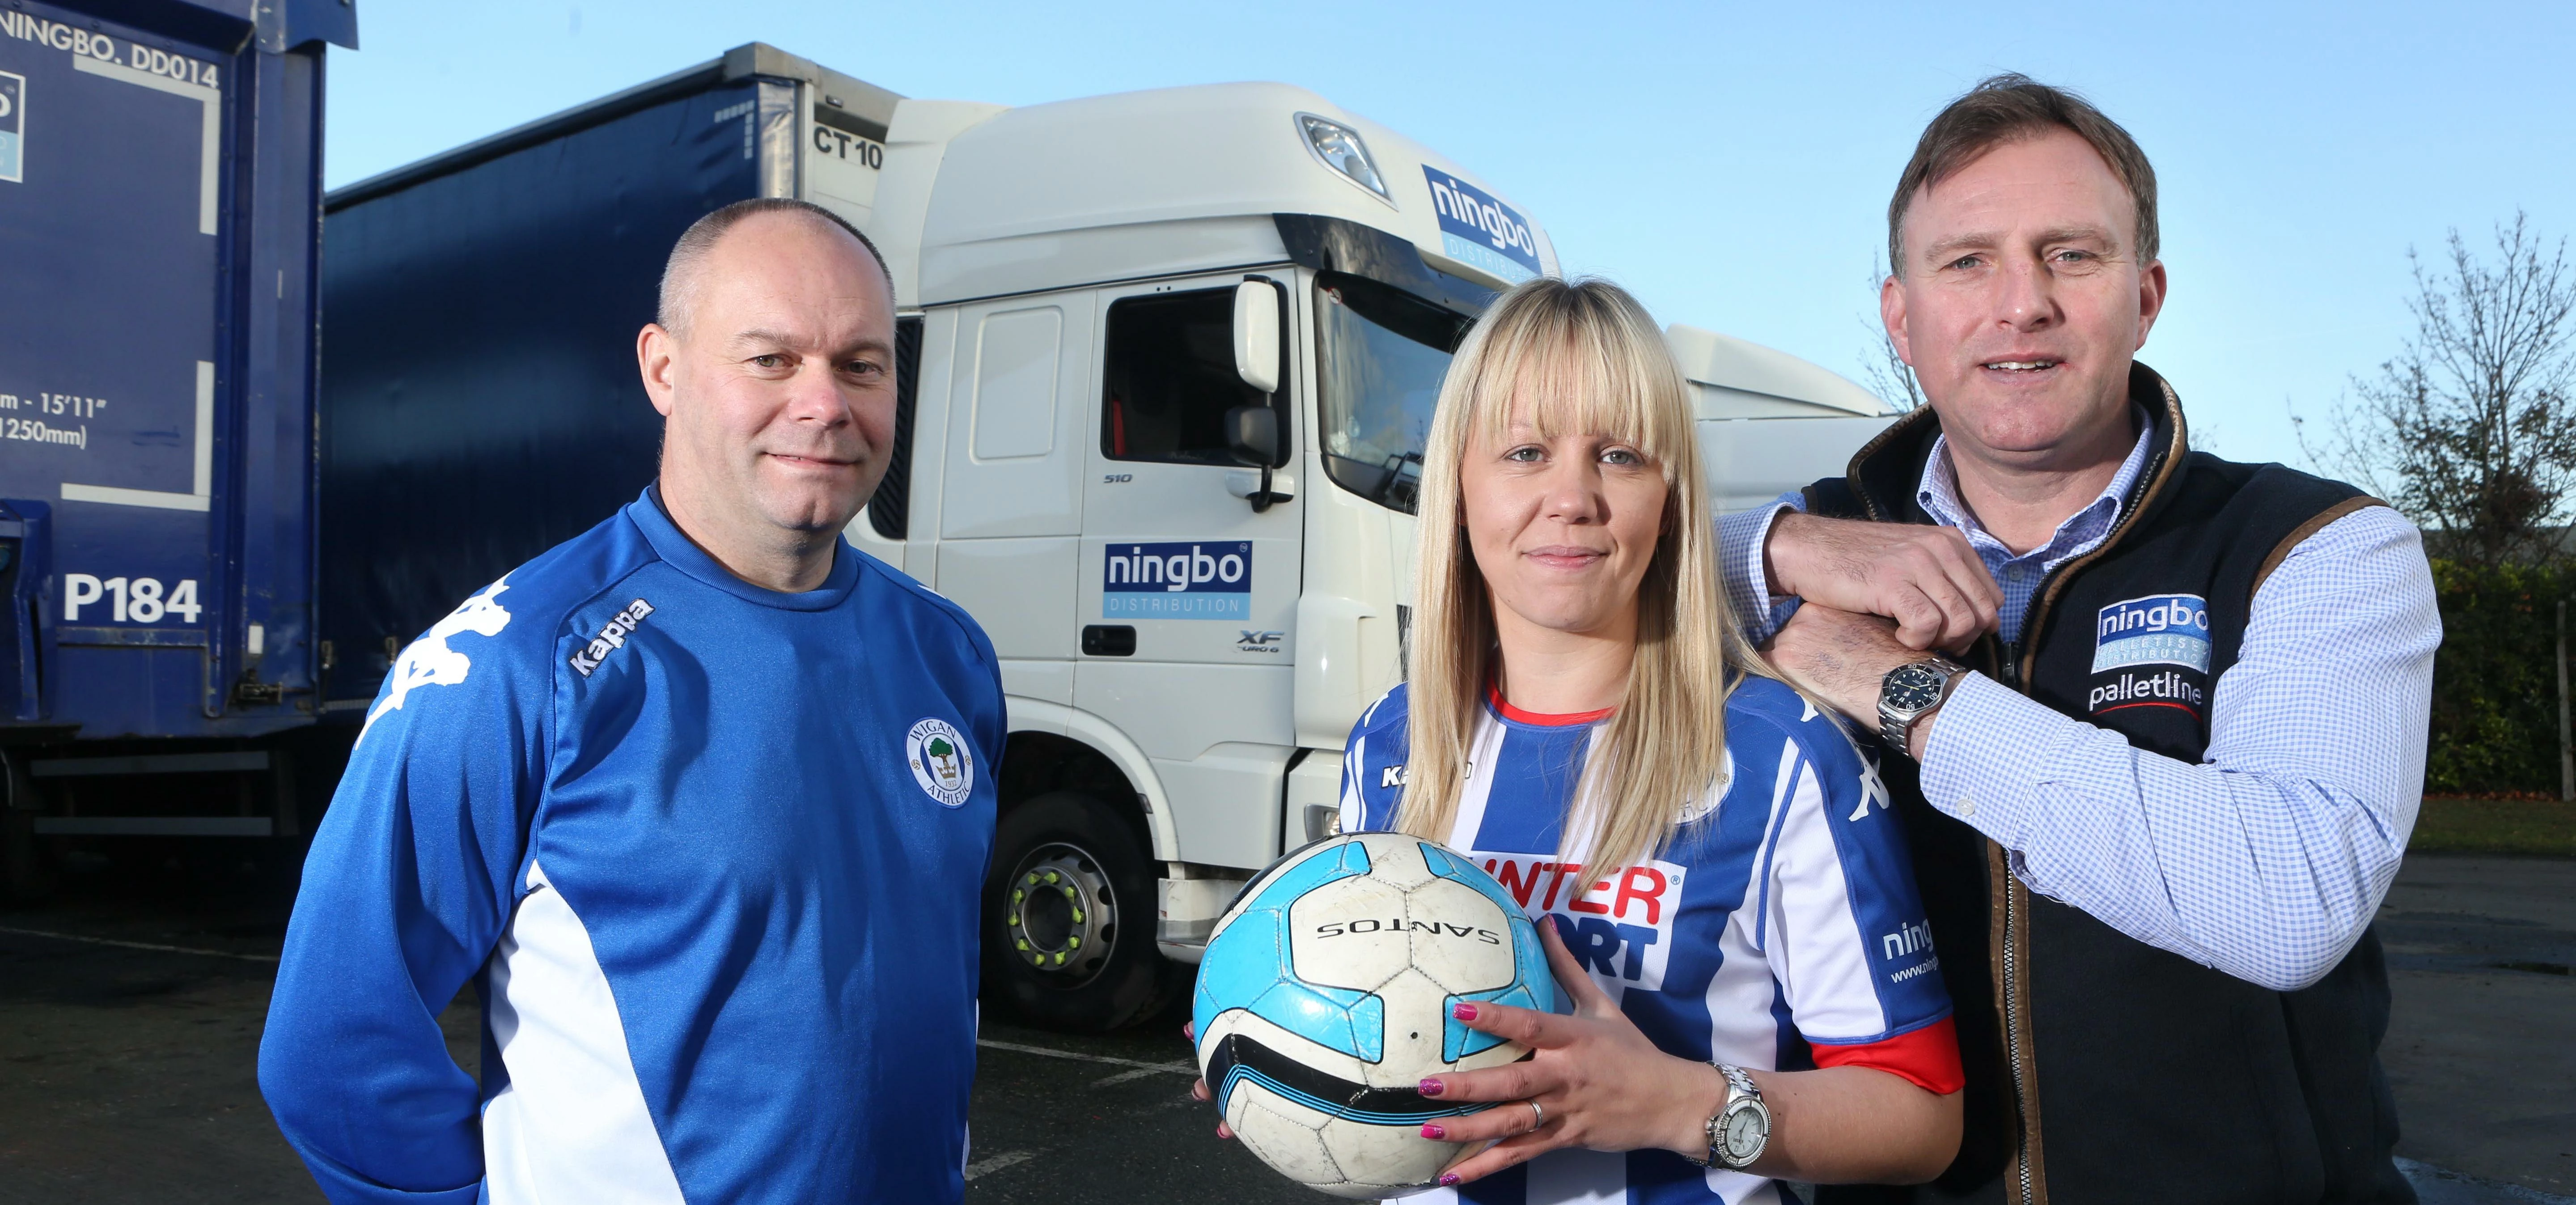 Wigan Athletic Ladies FC player Michelle Hunt is pictured with coach Derek Booth (blue top) and Chri